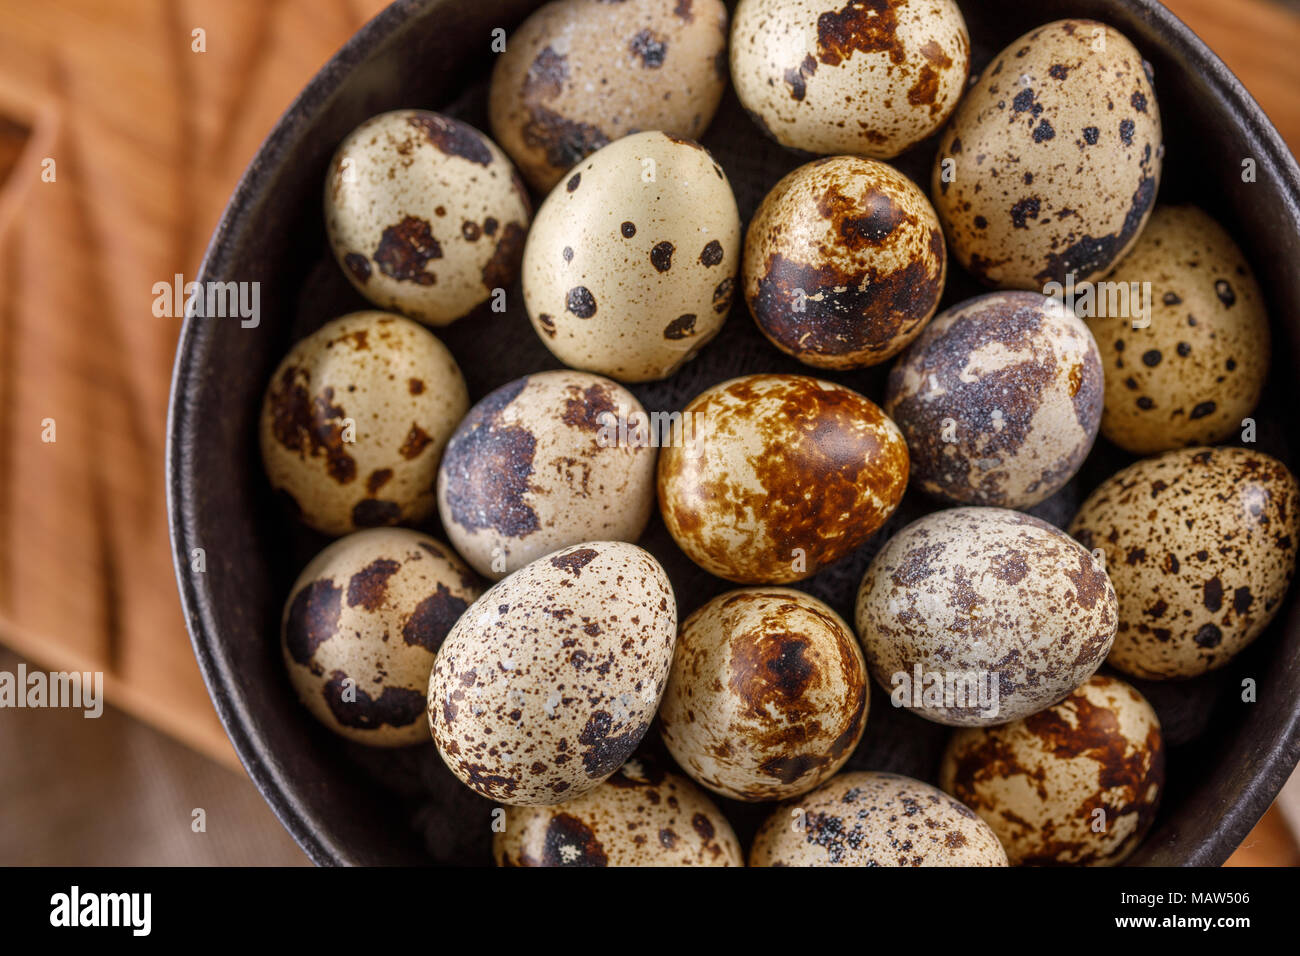 Quail eggs in a black cup close-up. A lot of quail eggs in a cup. Stock Photo